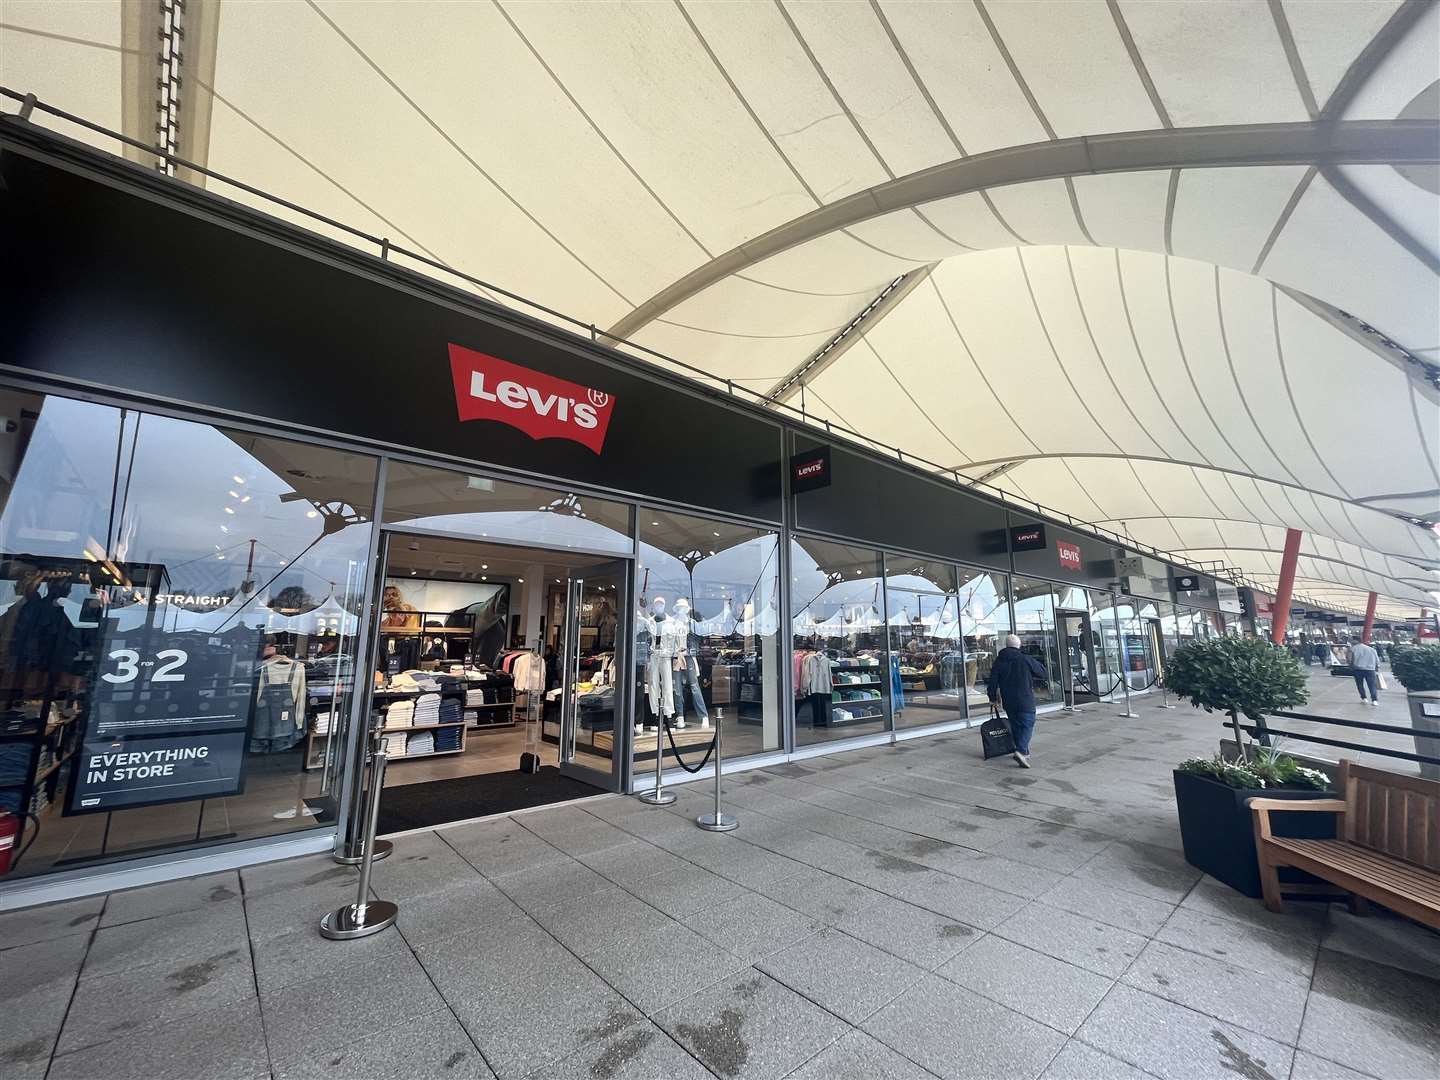 Levi's at Ashford Outlet has expanded